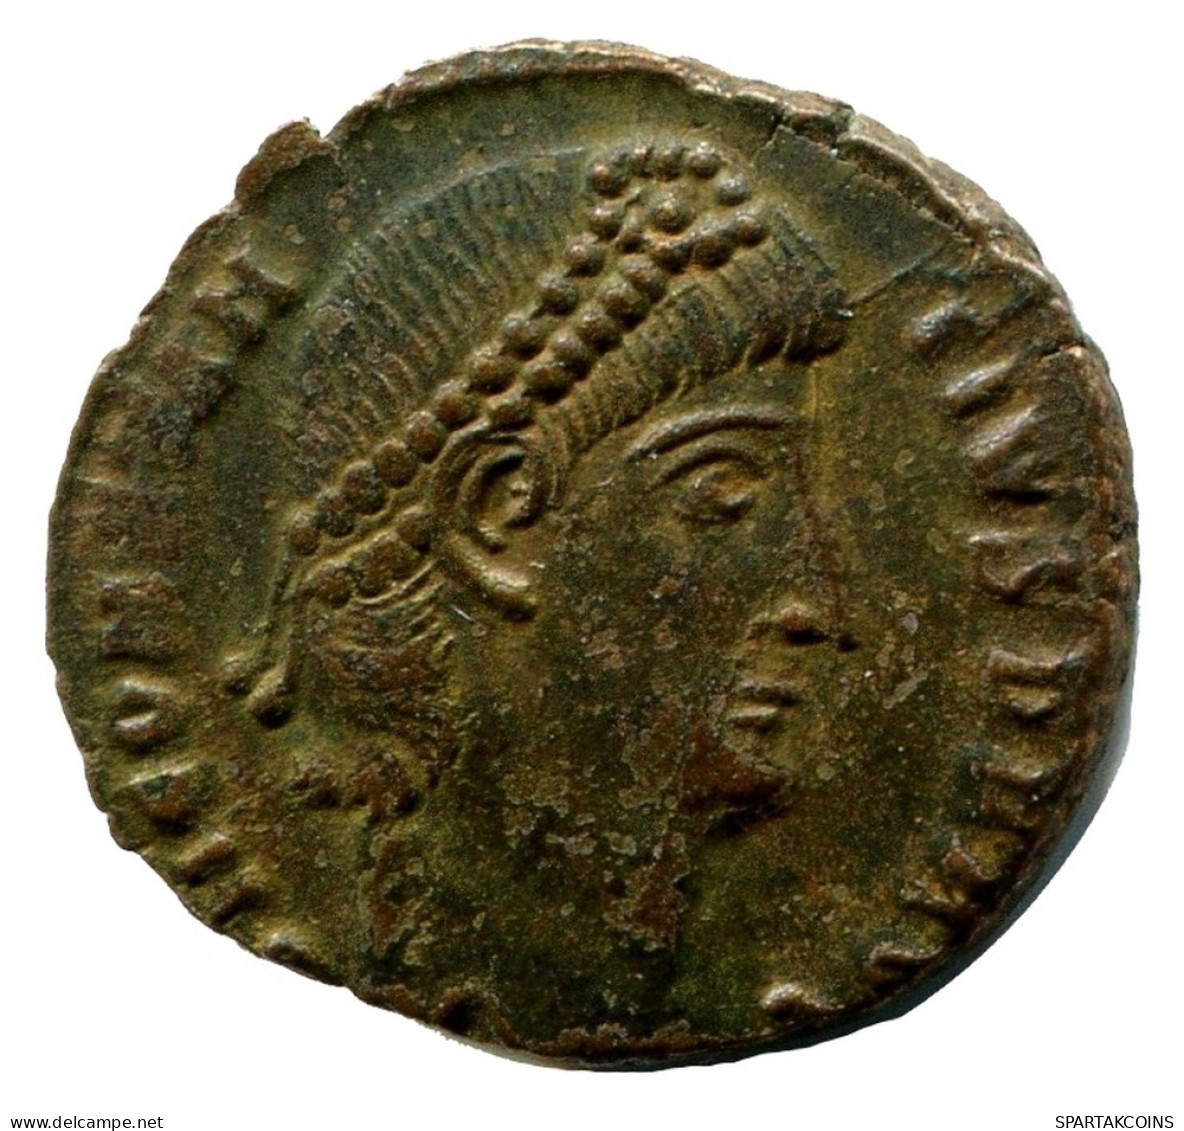 CONSTANTIUS II MINTED IN ANTIOCH FOUND IN IHNASYAH HOARD EGYPT #ANC11228.14.D.A - The Christian Empire (307 AD Tot 363 AD)